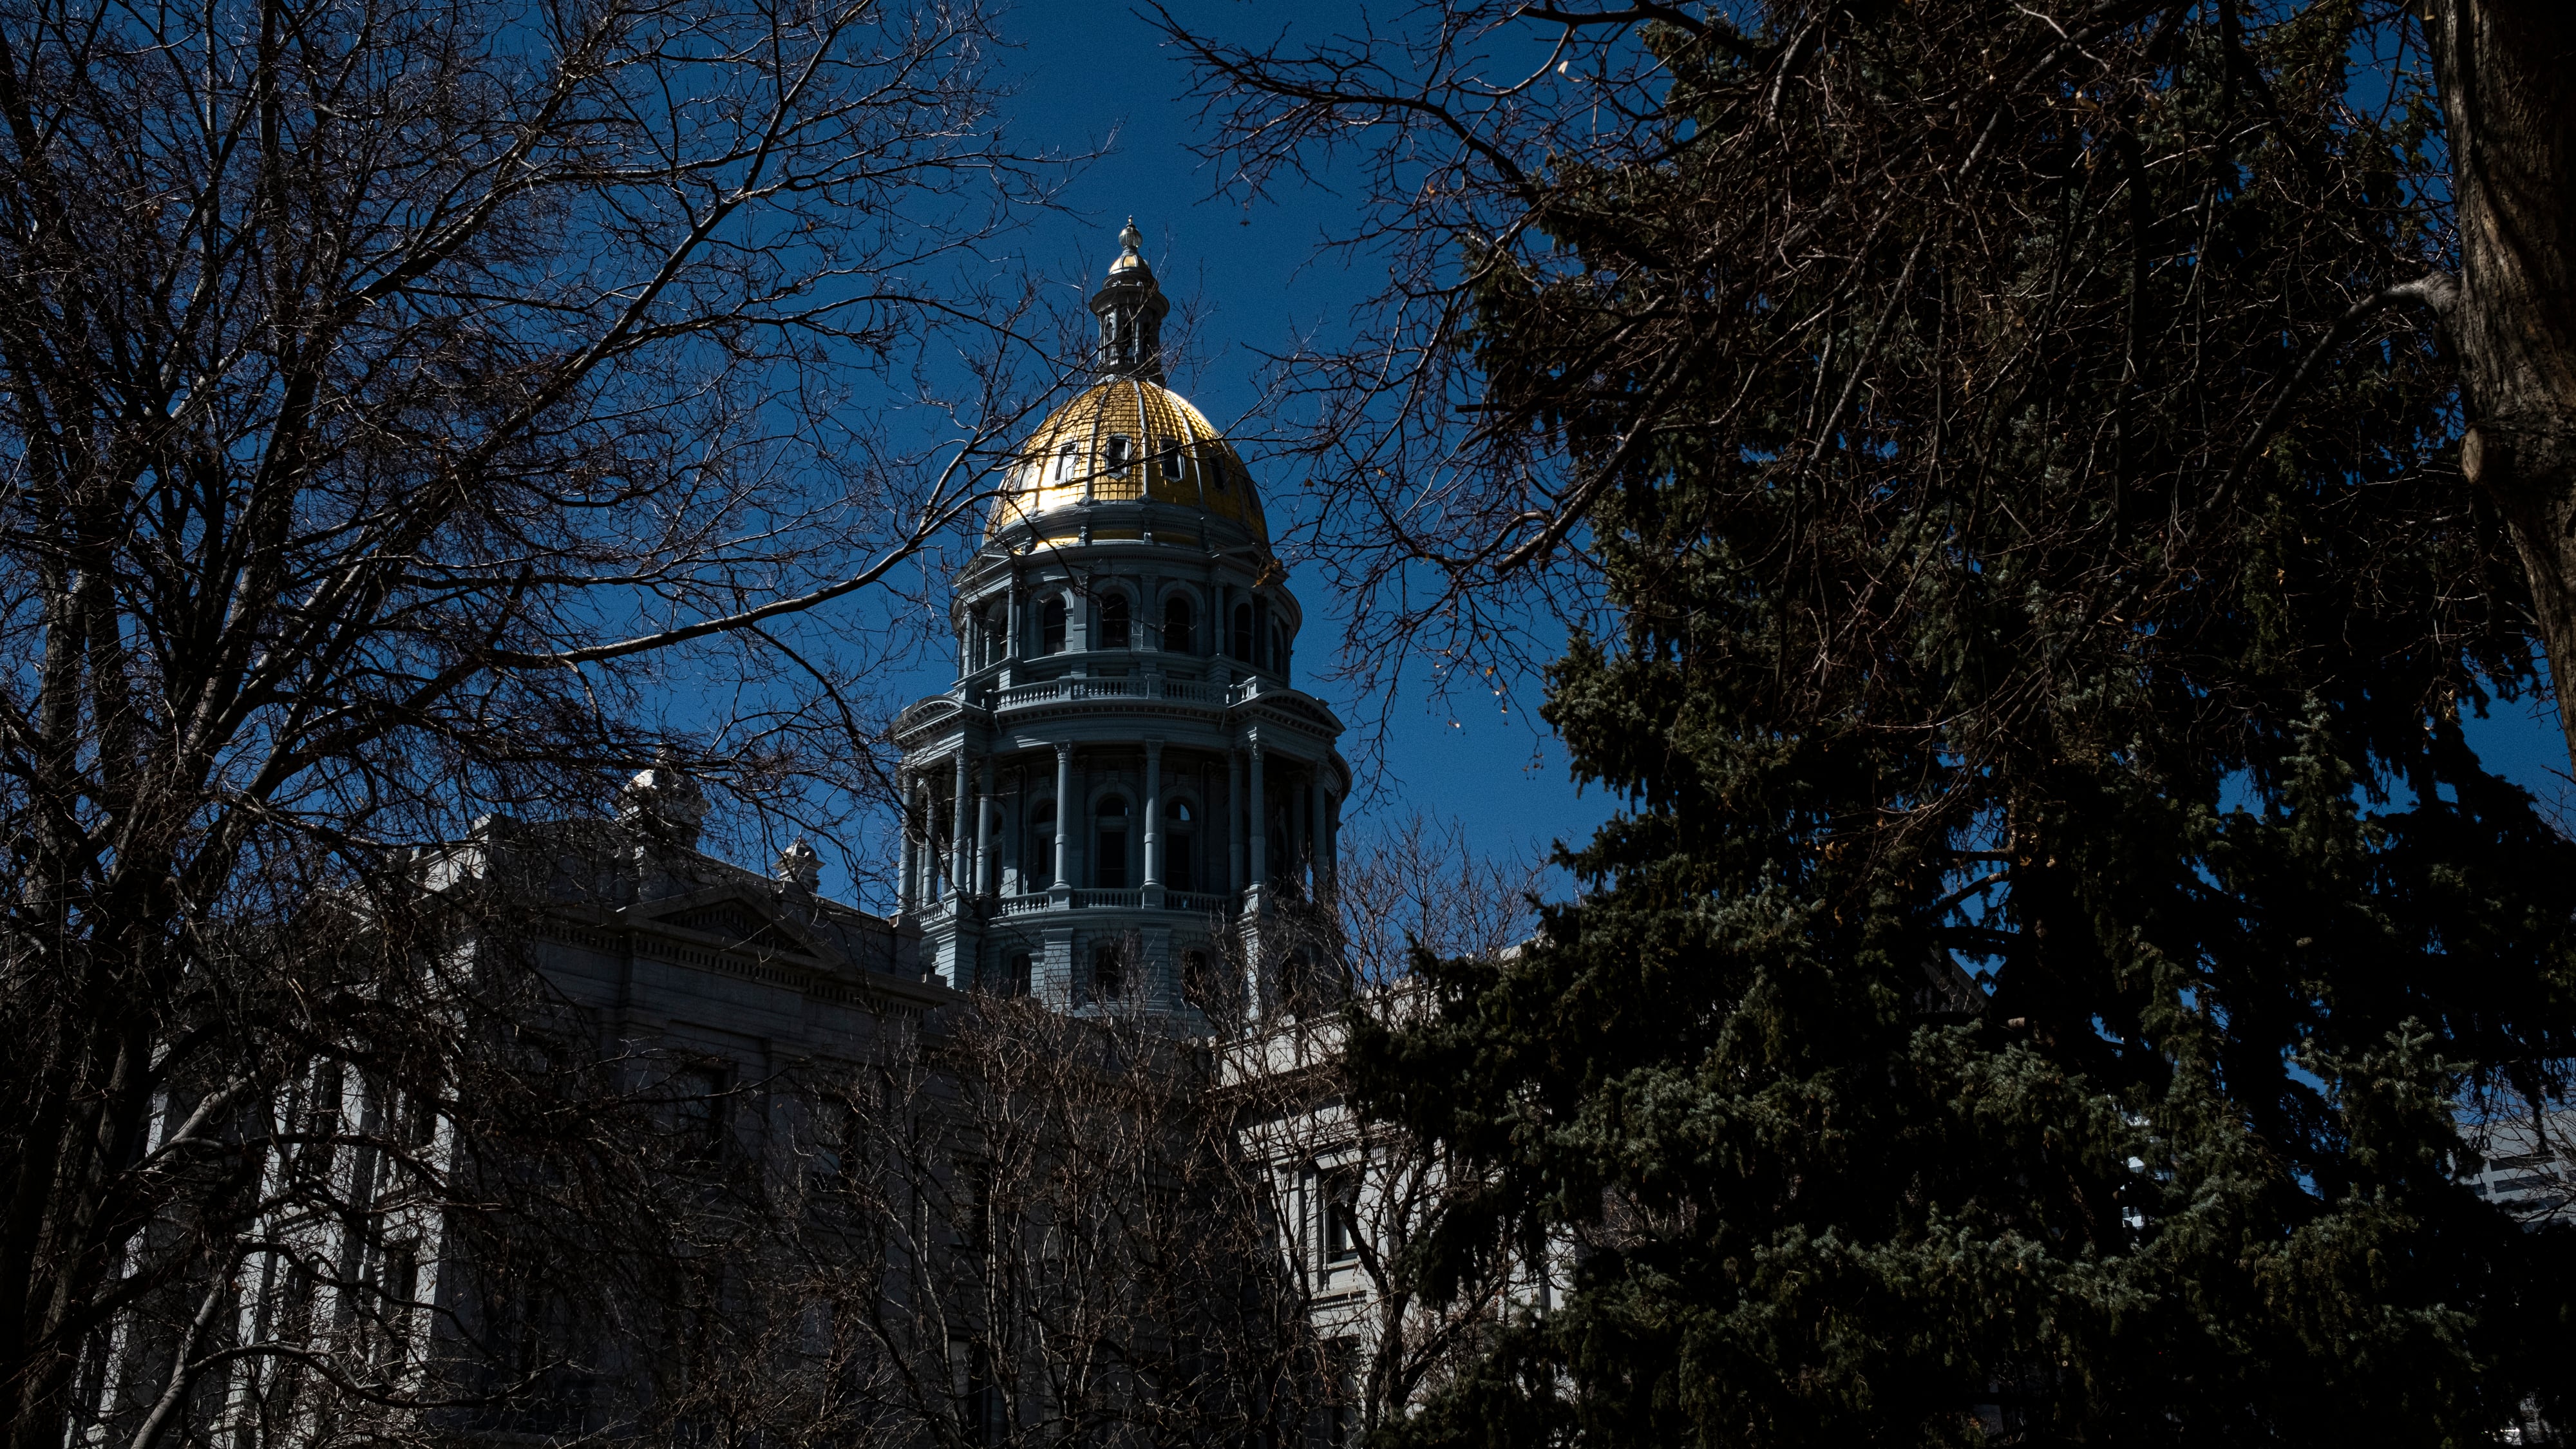 The Colorado State Capitol against a blue sky with trees in the foreground.